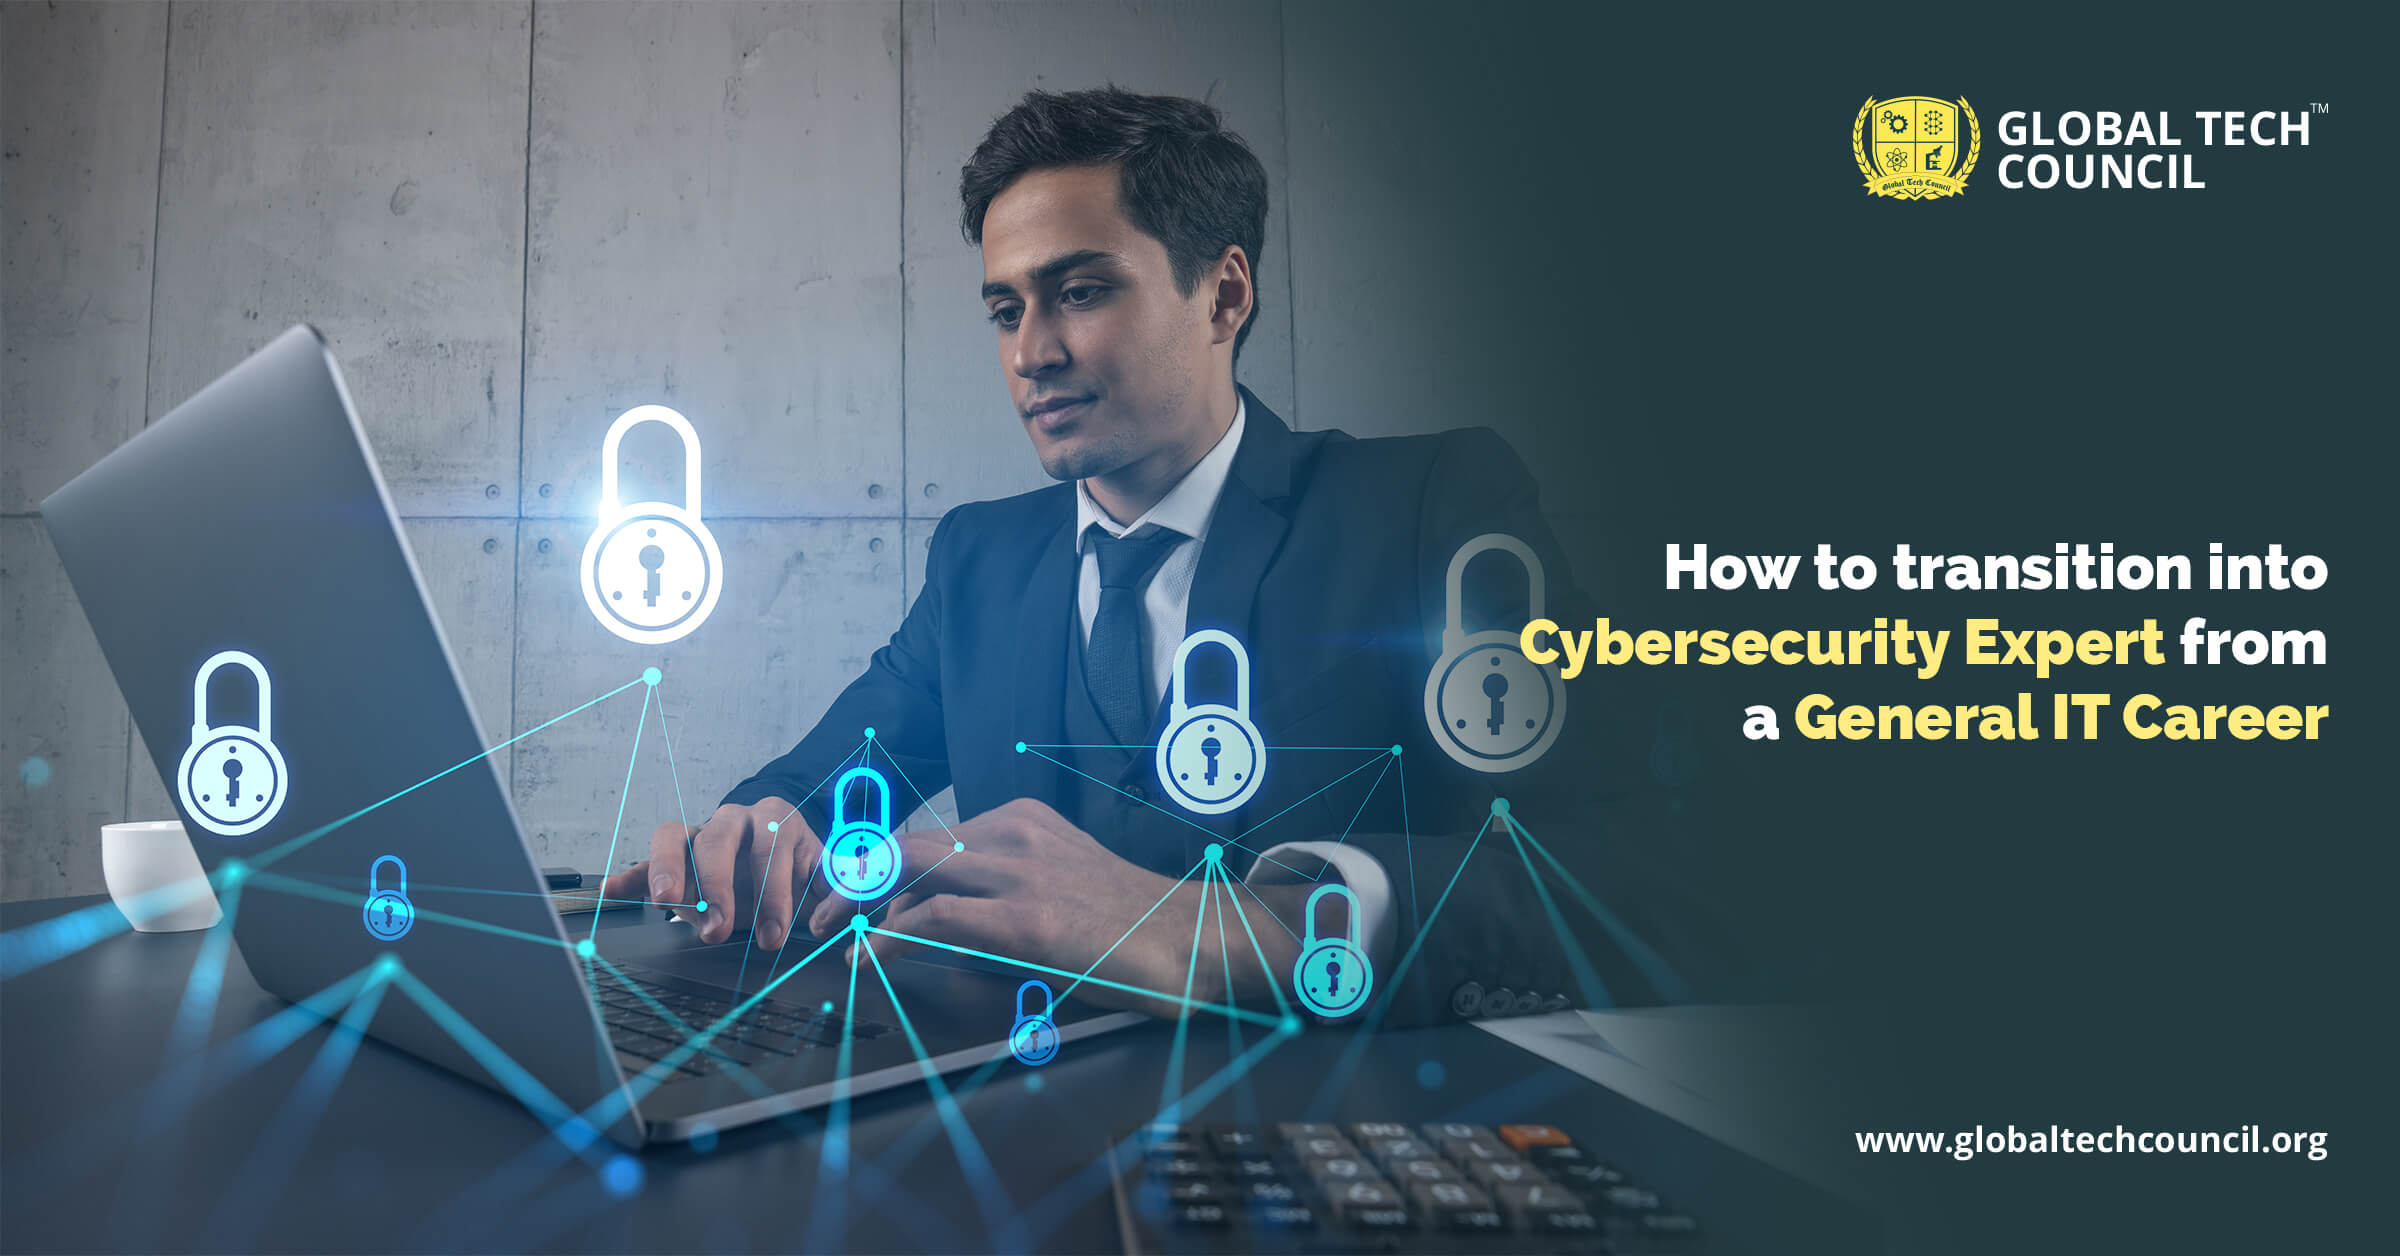 How to transition into Cybersecurity Expert from a General IT Career